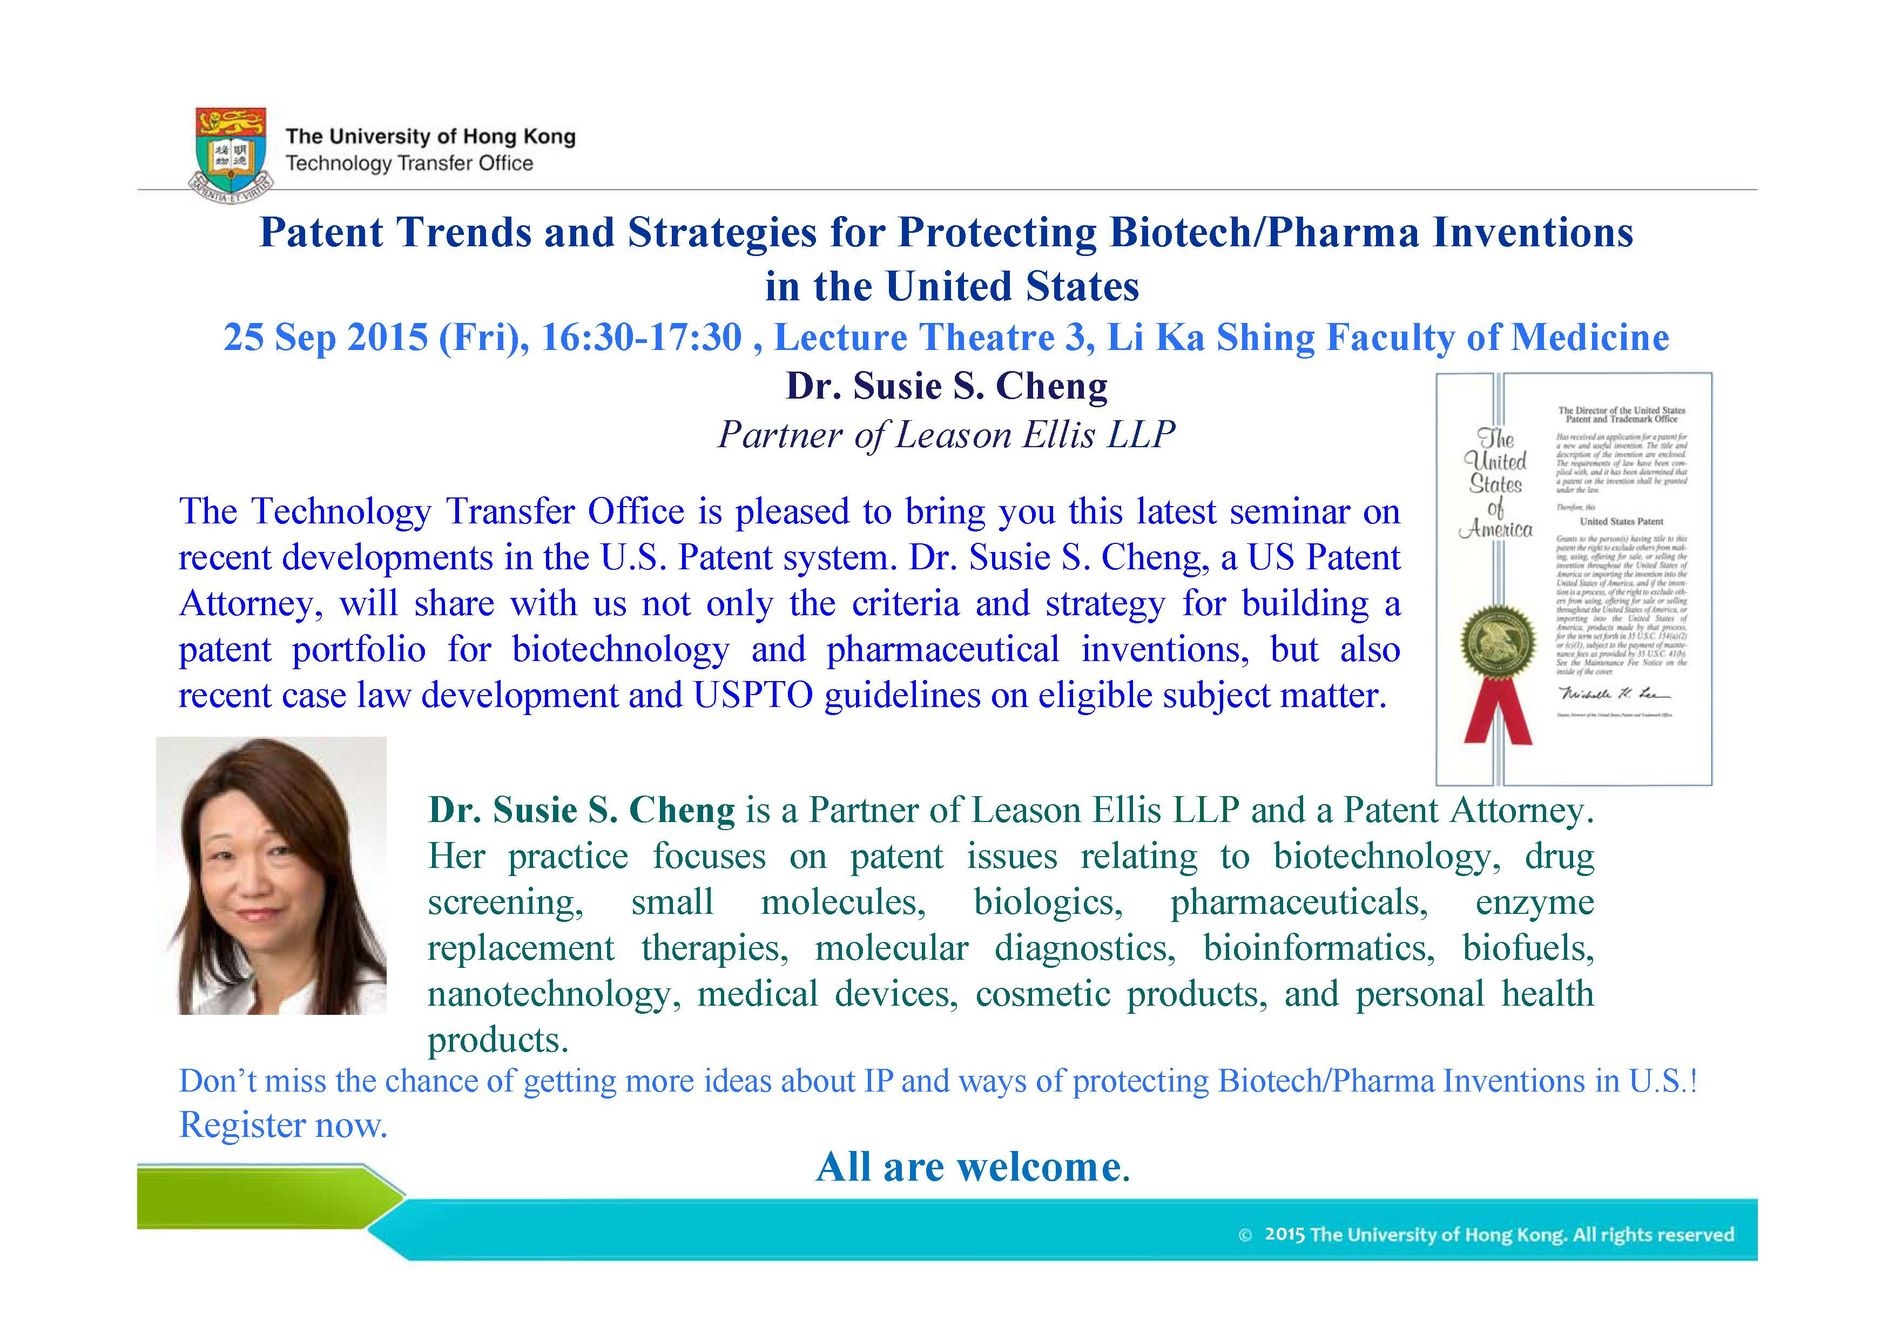 Patent Trends and Strategies for Protecting Biotech/Pharma Inventions in the United States